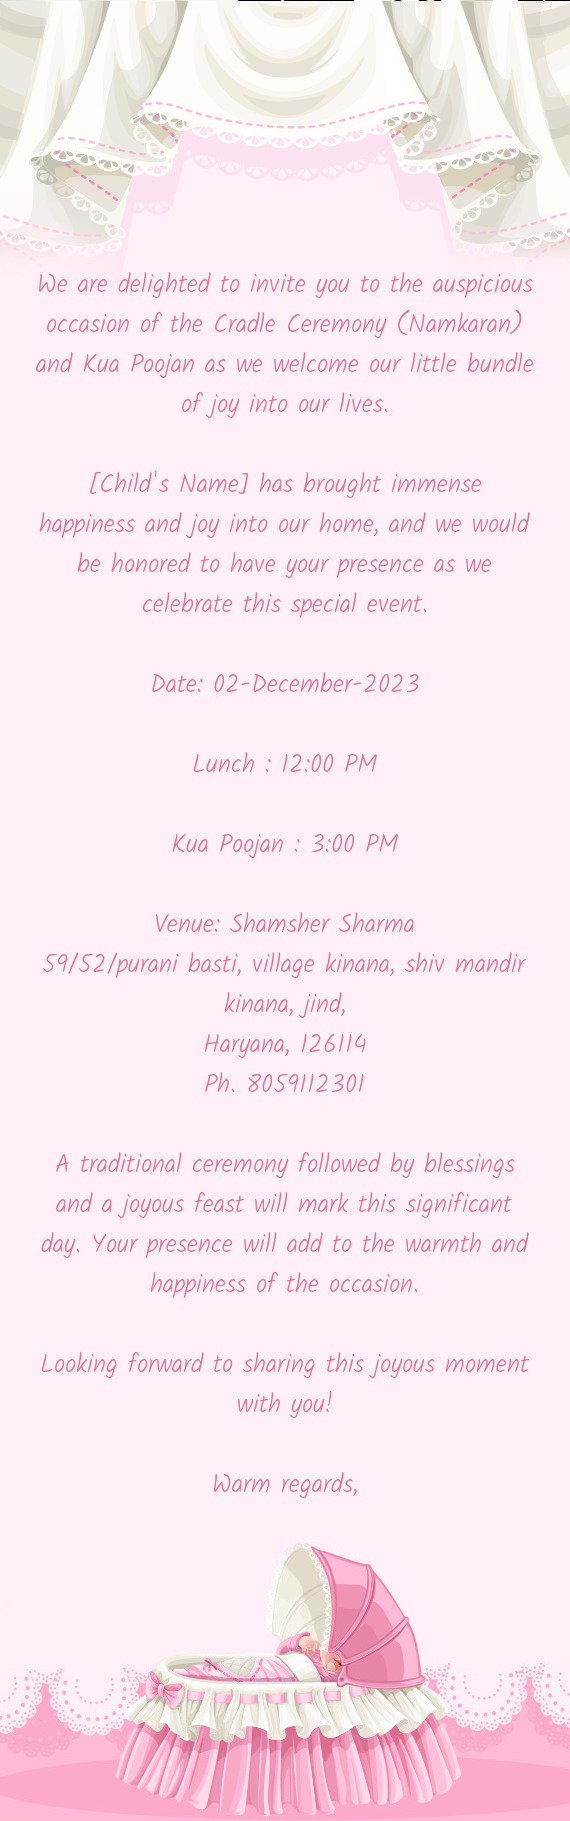 We are delighted to invite you to the auspicious occasion of the Cradle Ceremony (Namkaran) and Kua